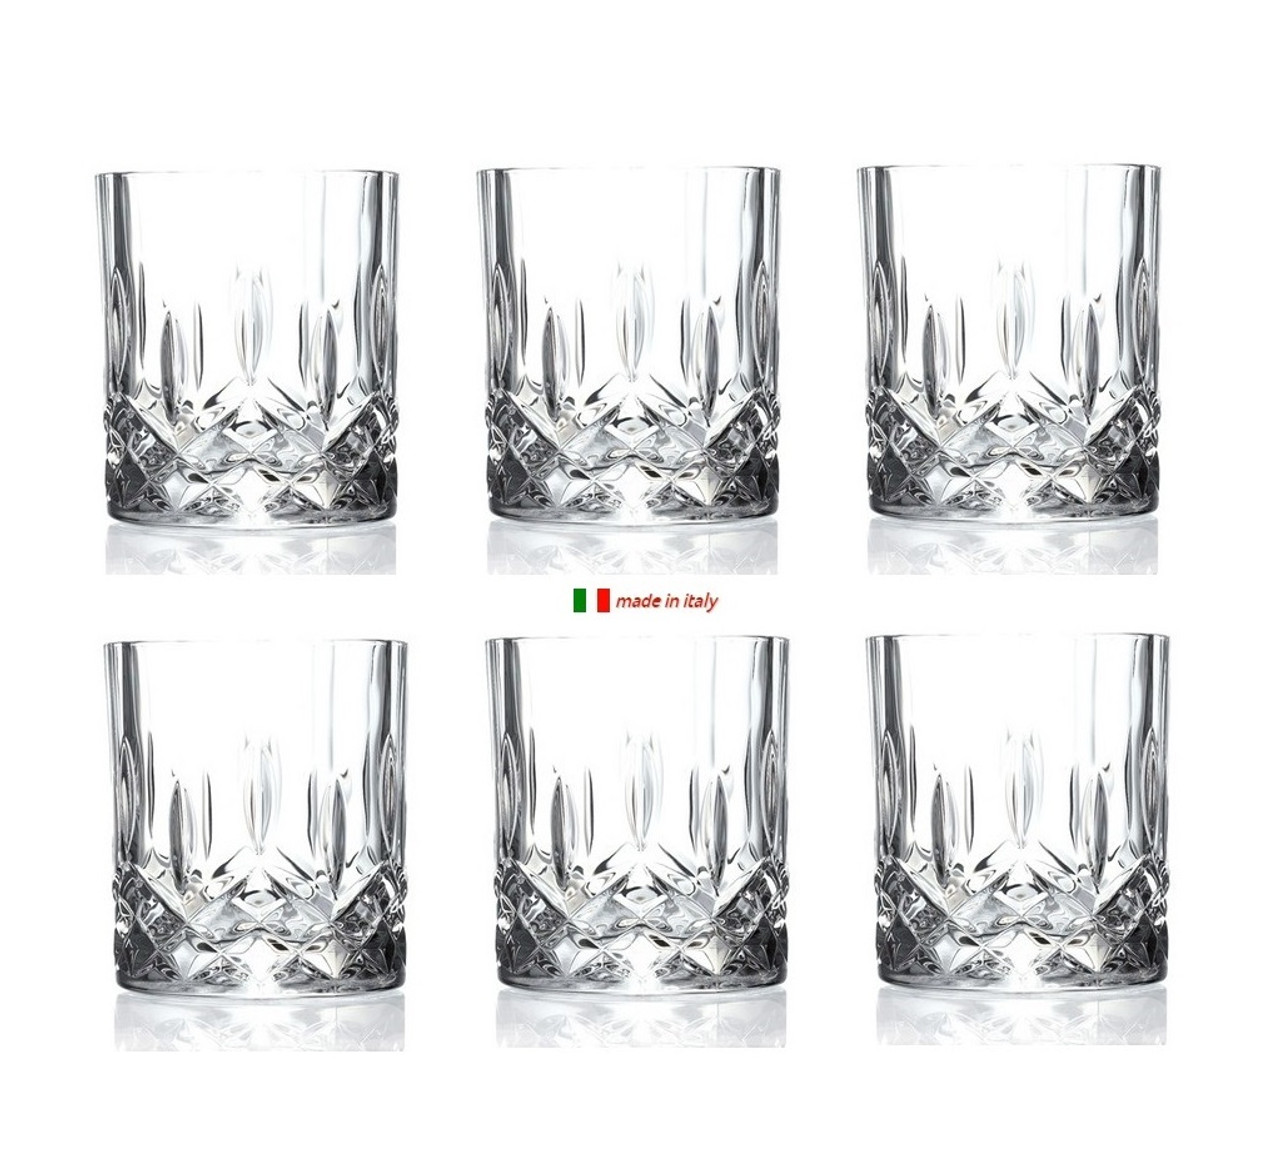 https://cdn11.bigcommerce.com/s-9mnzpxwffi/images/stencil/1280x1280/products/319/1727/European-crystal-whiskey-glasses__01548.1646150071.jpg?c=2